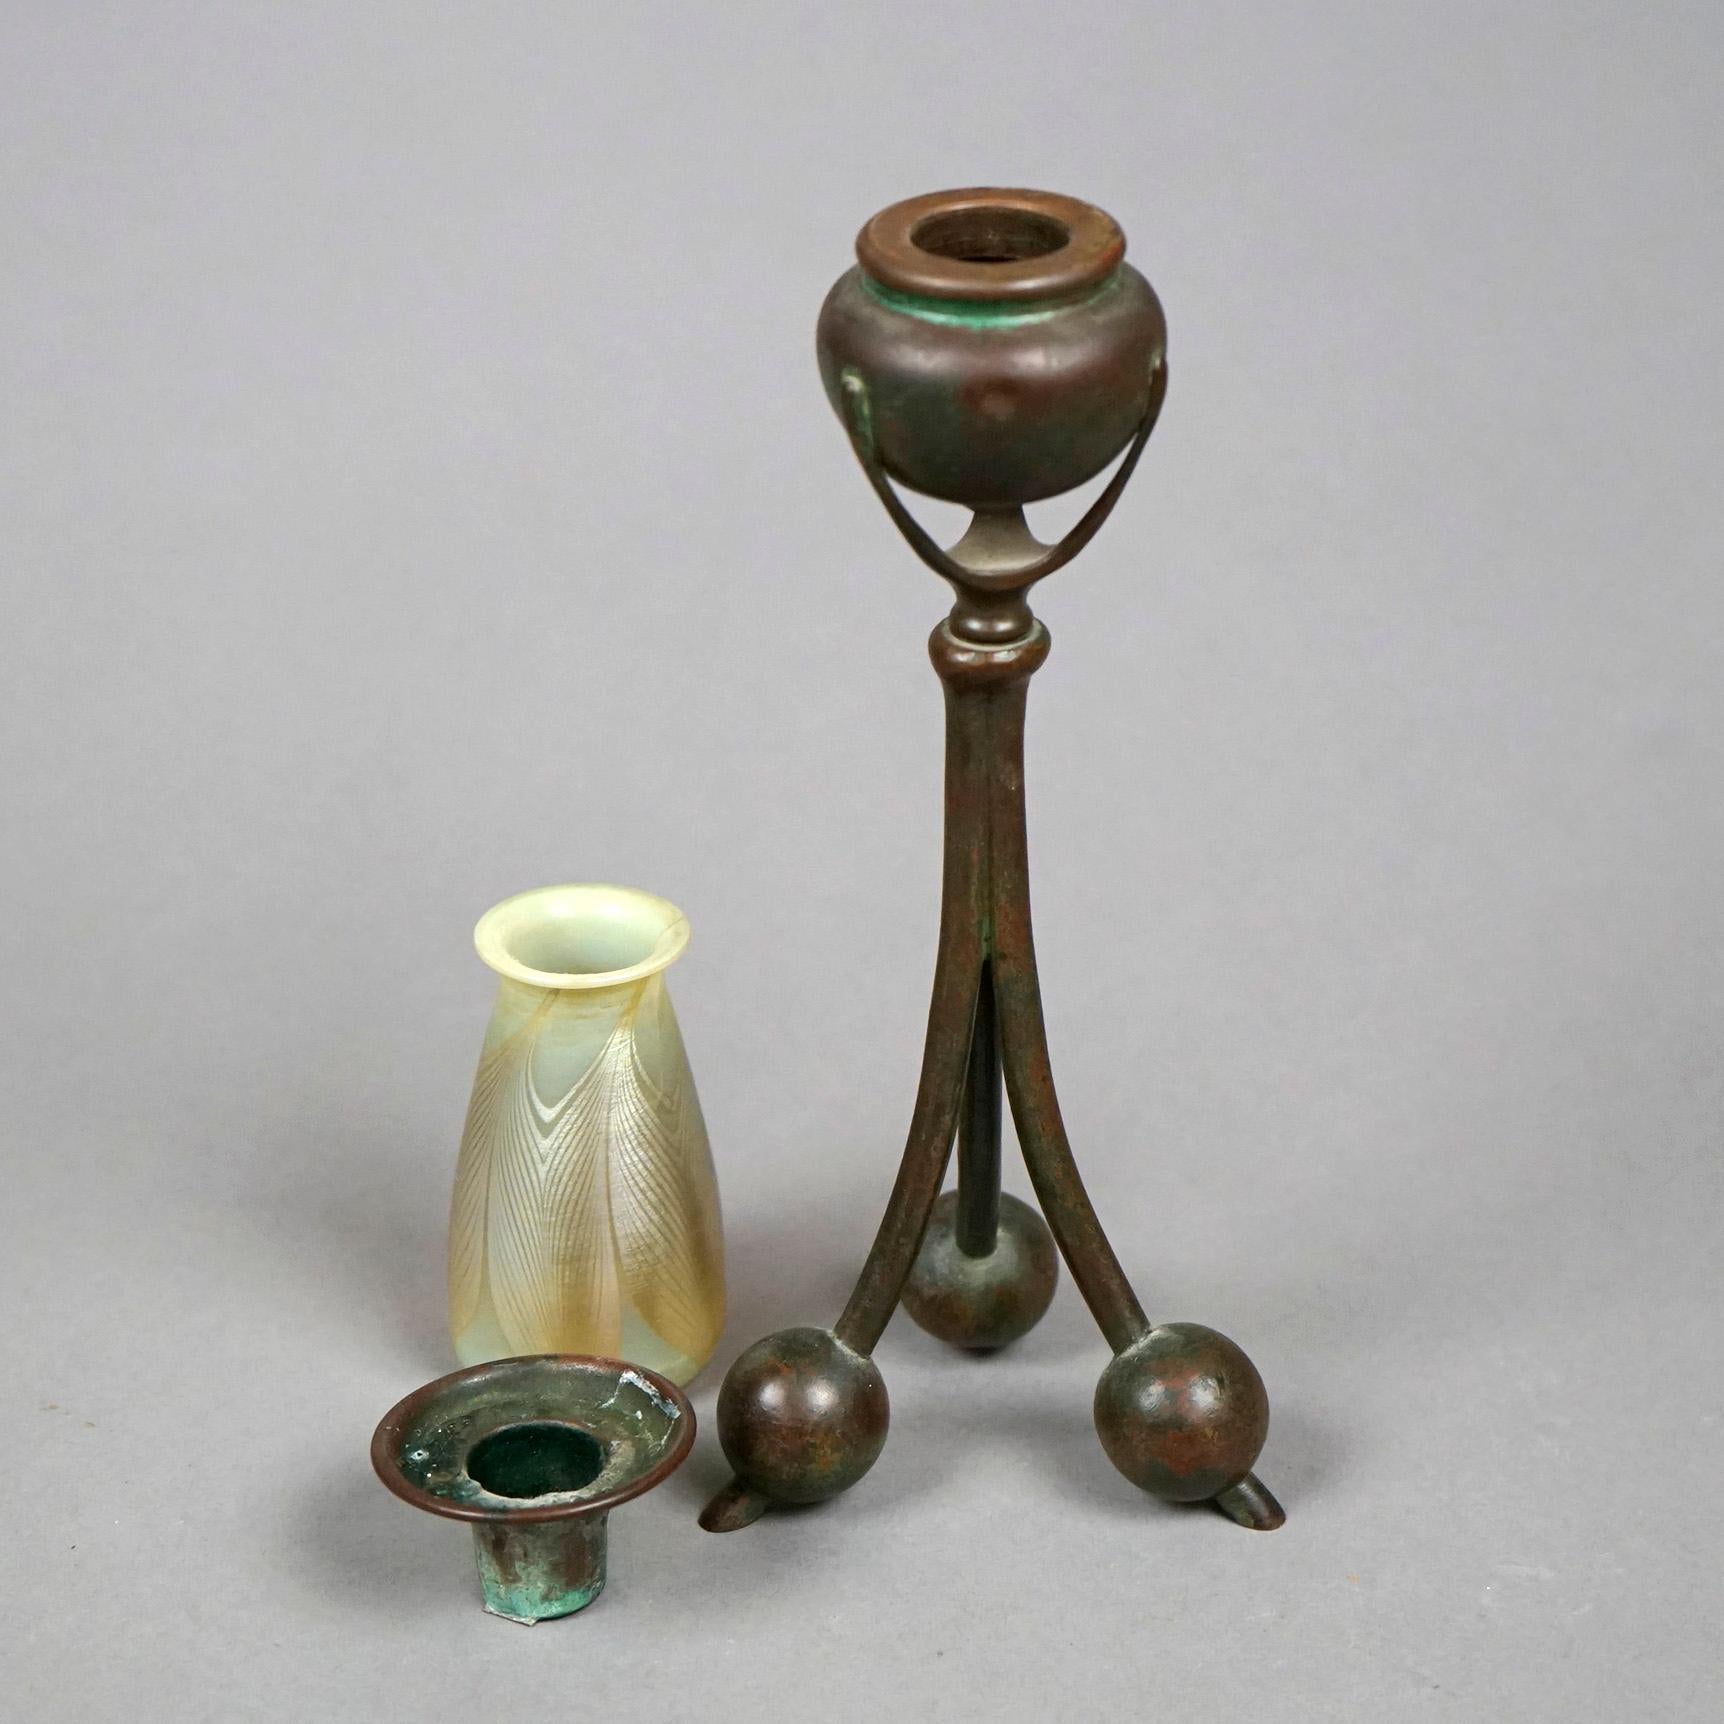 20th Century Tiffany Bronze Candlestick & Favrile Feather Art Glass Shade, Signed, c1920